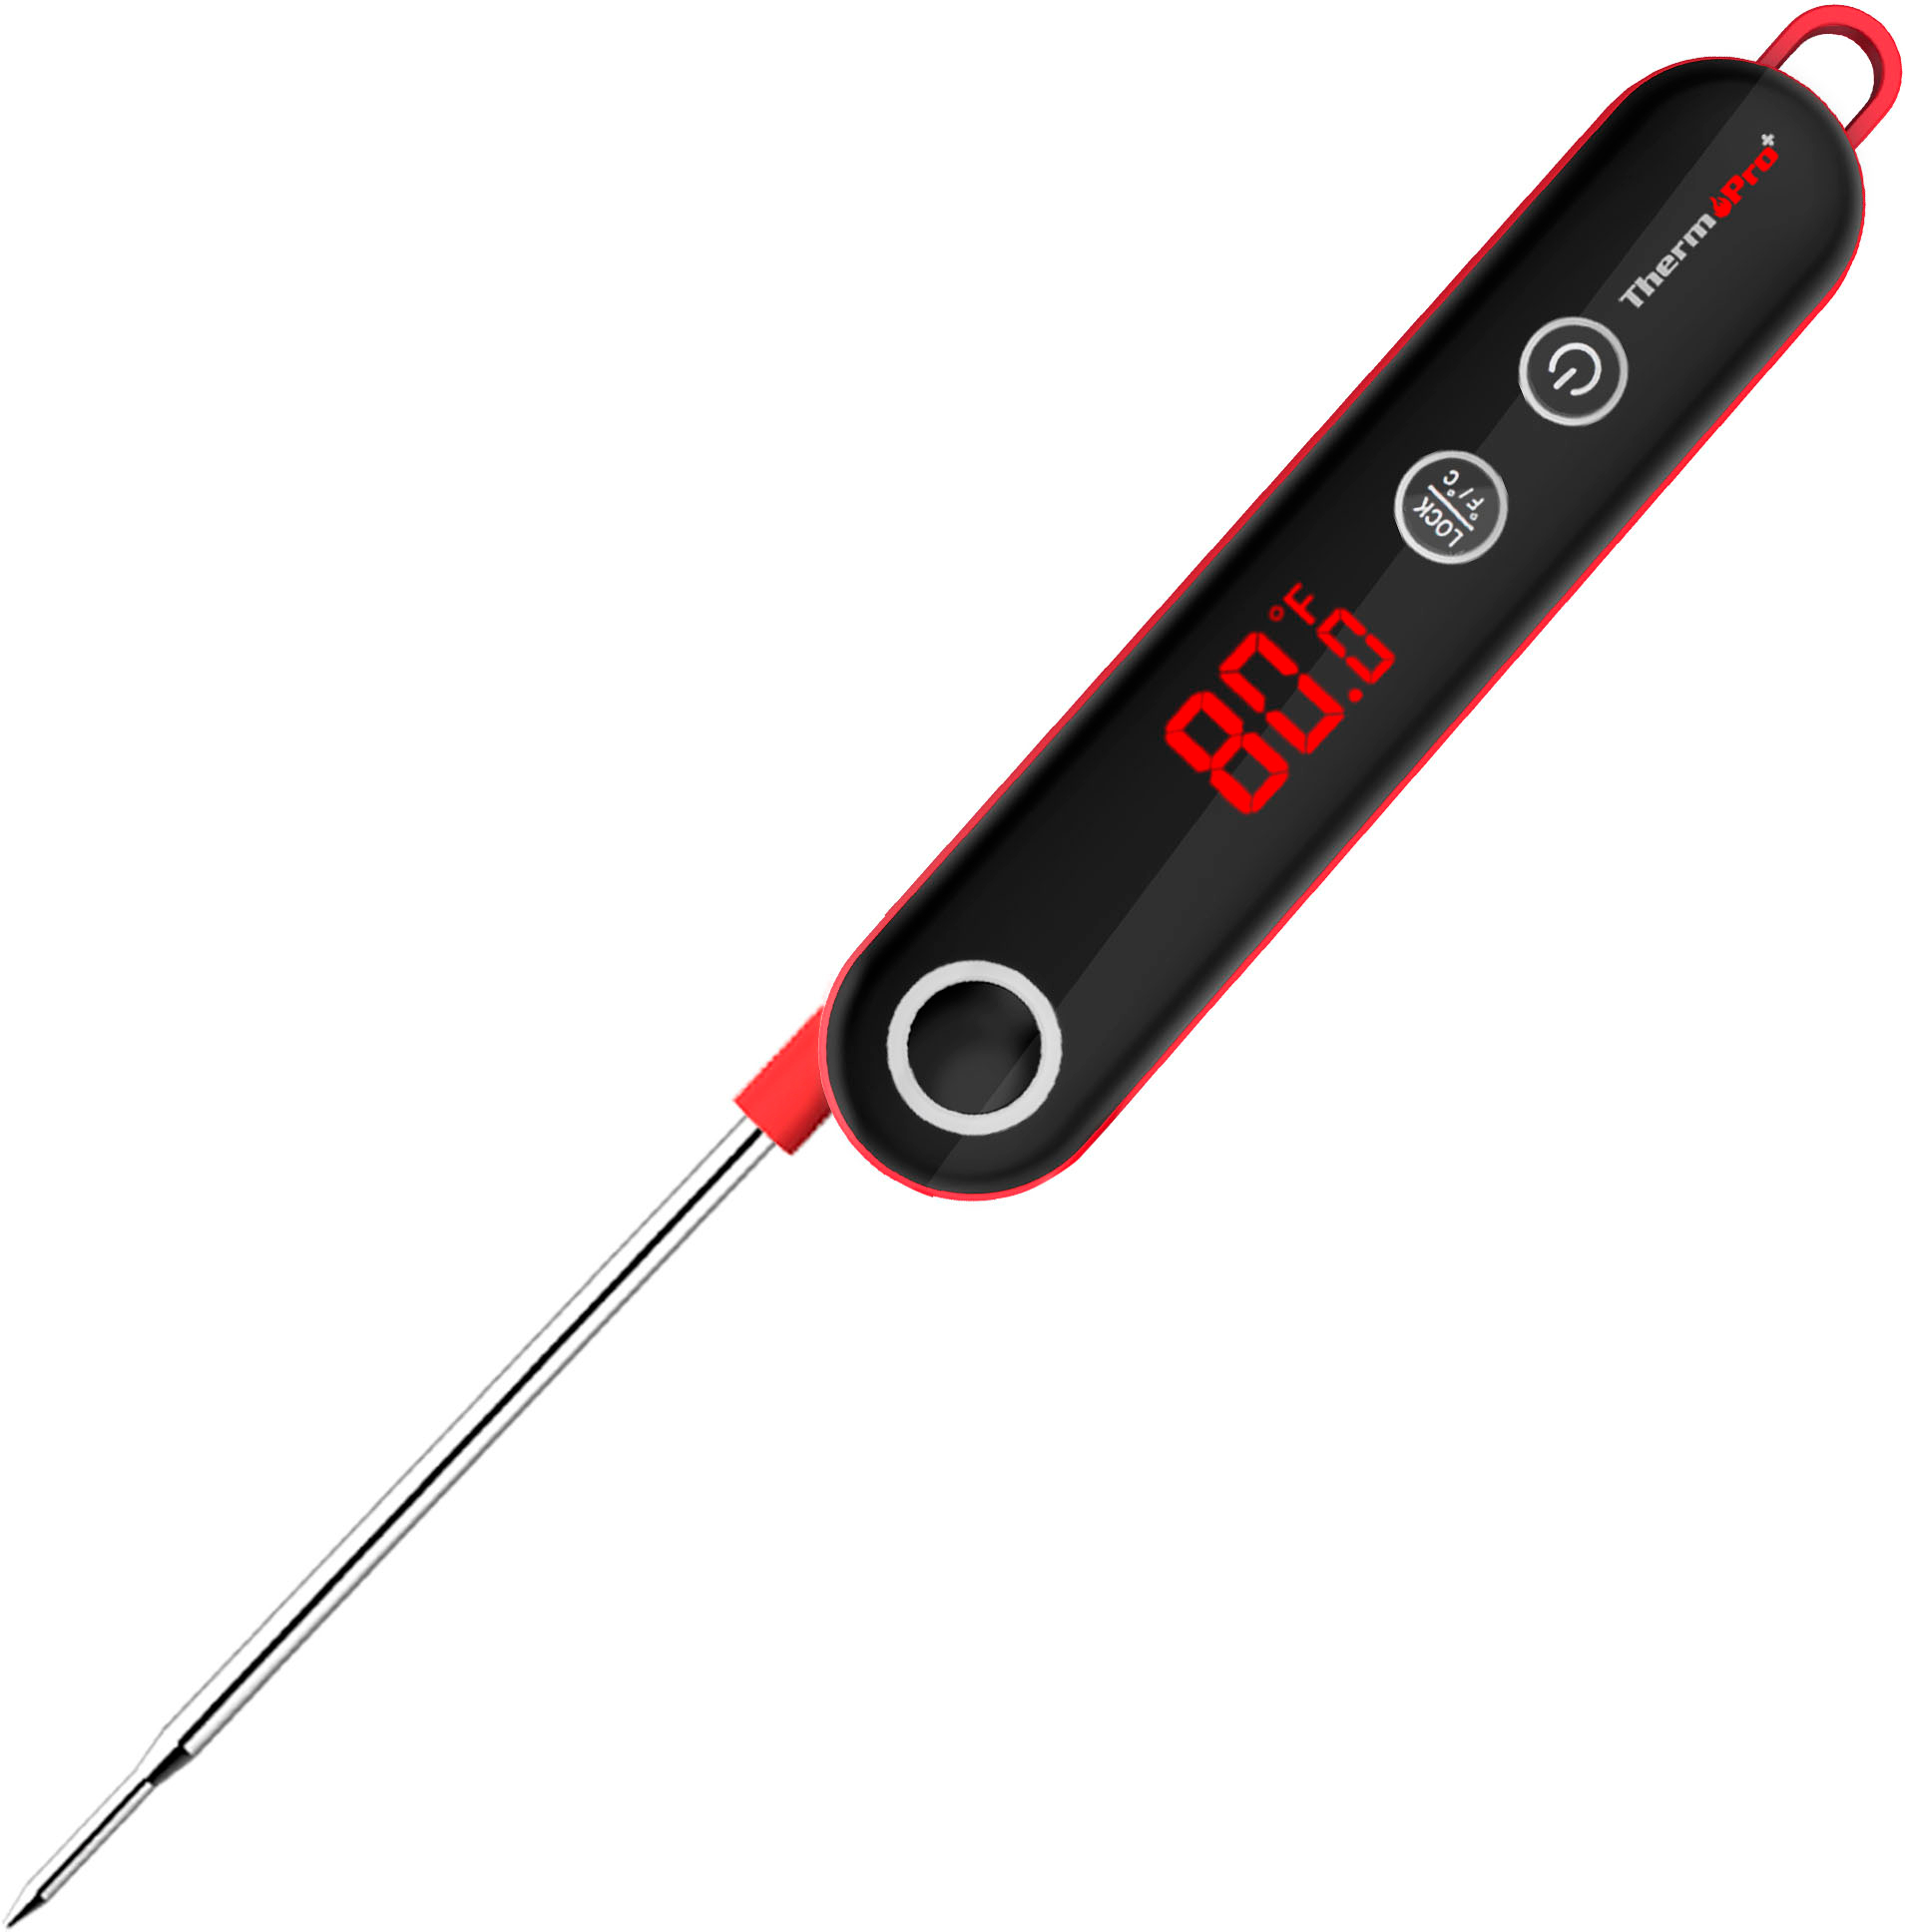 THERMPRO Instant Meat Thermometer